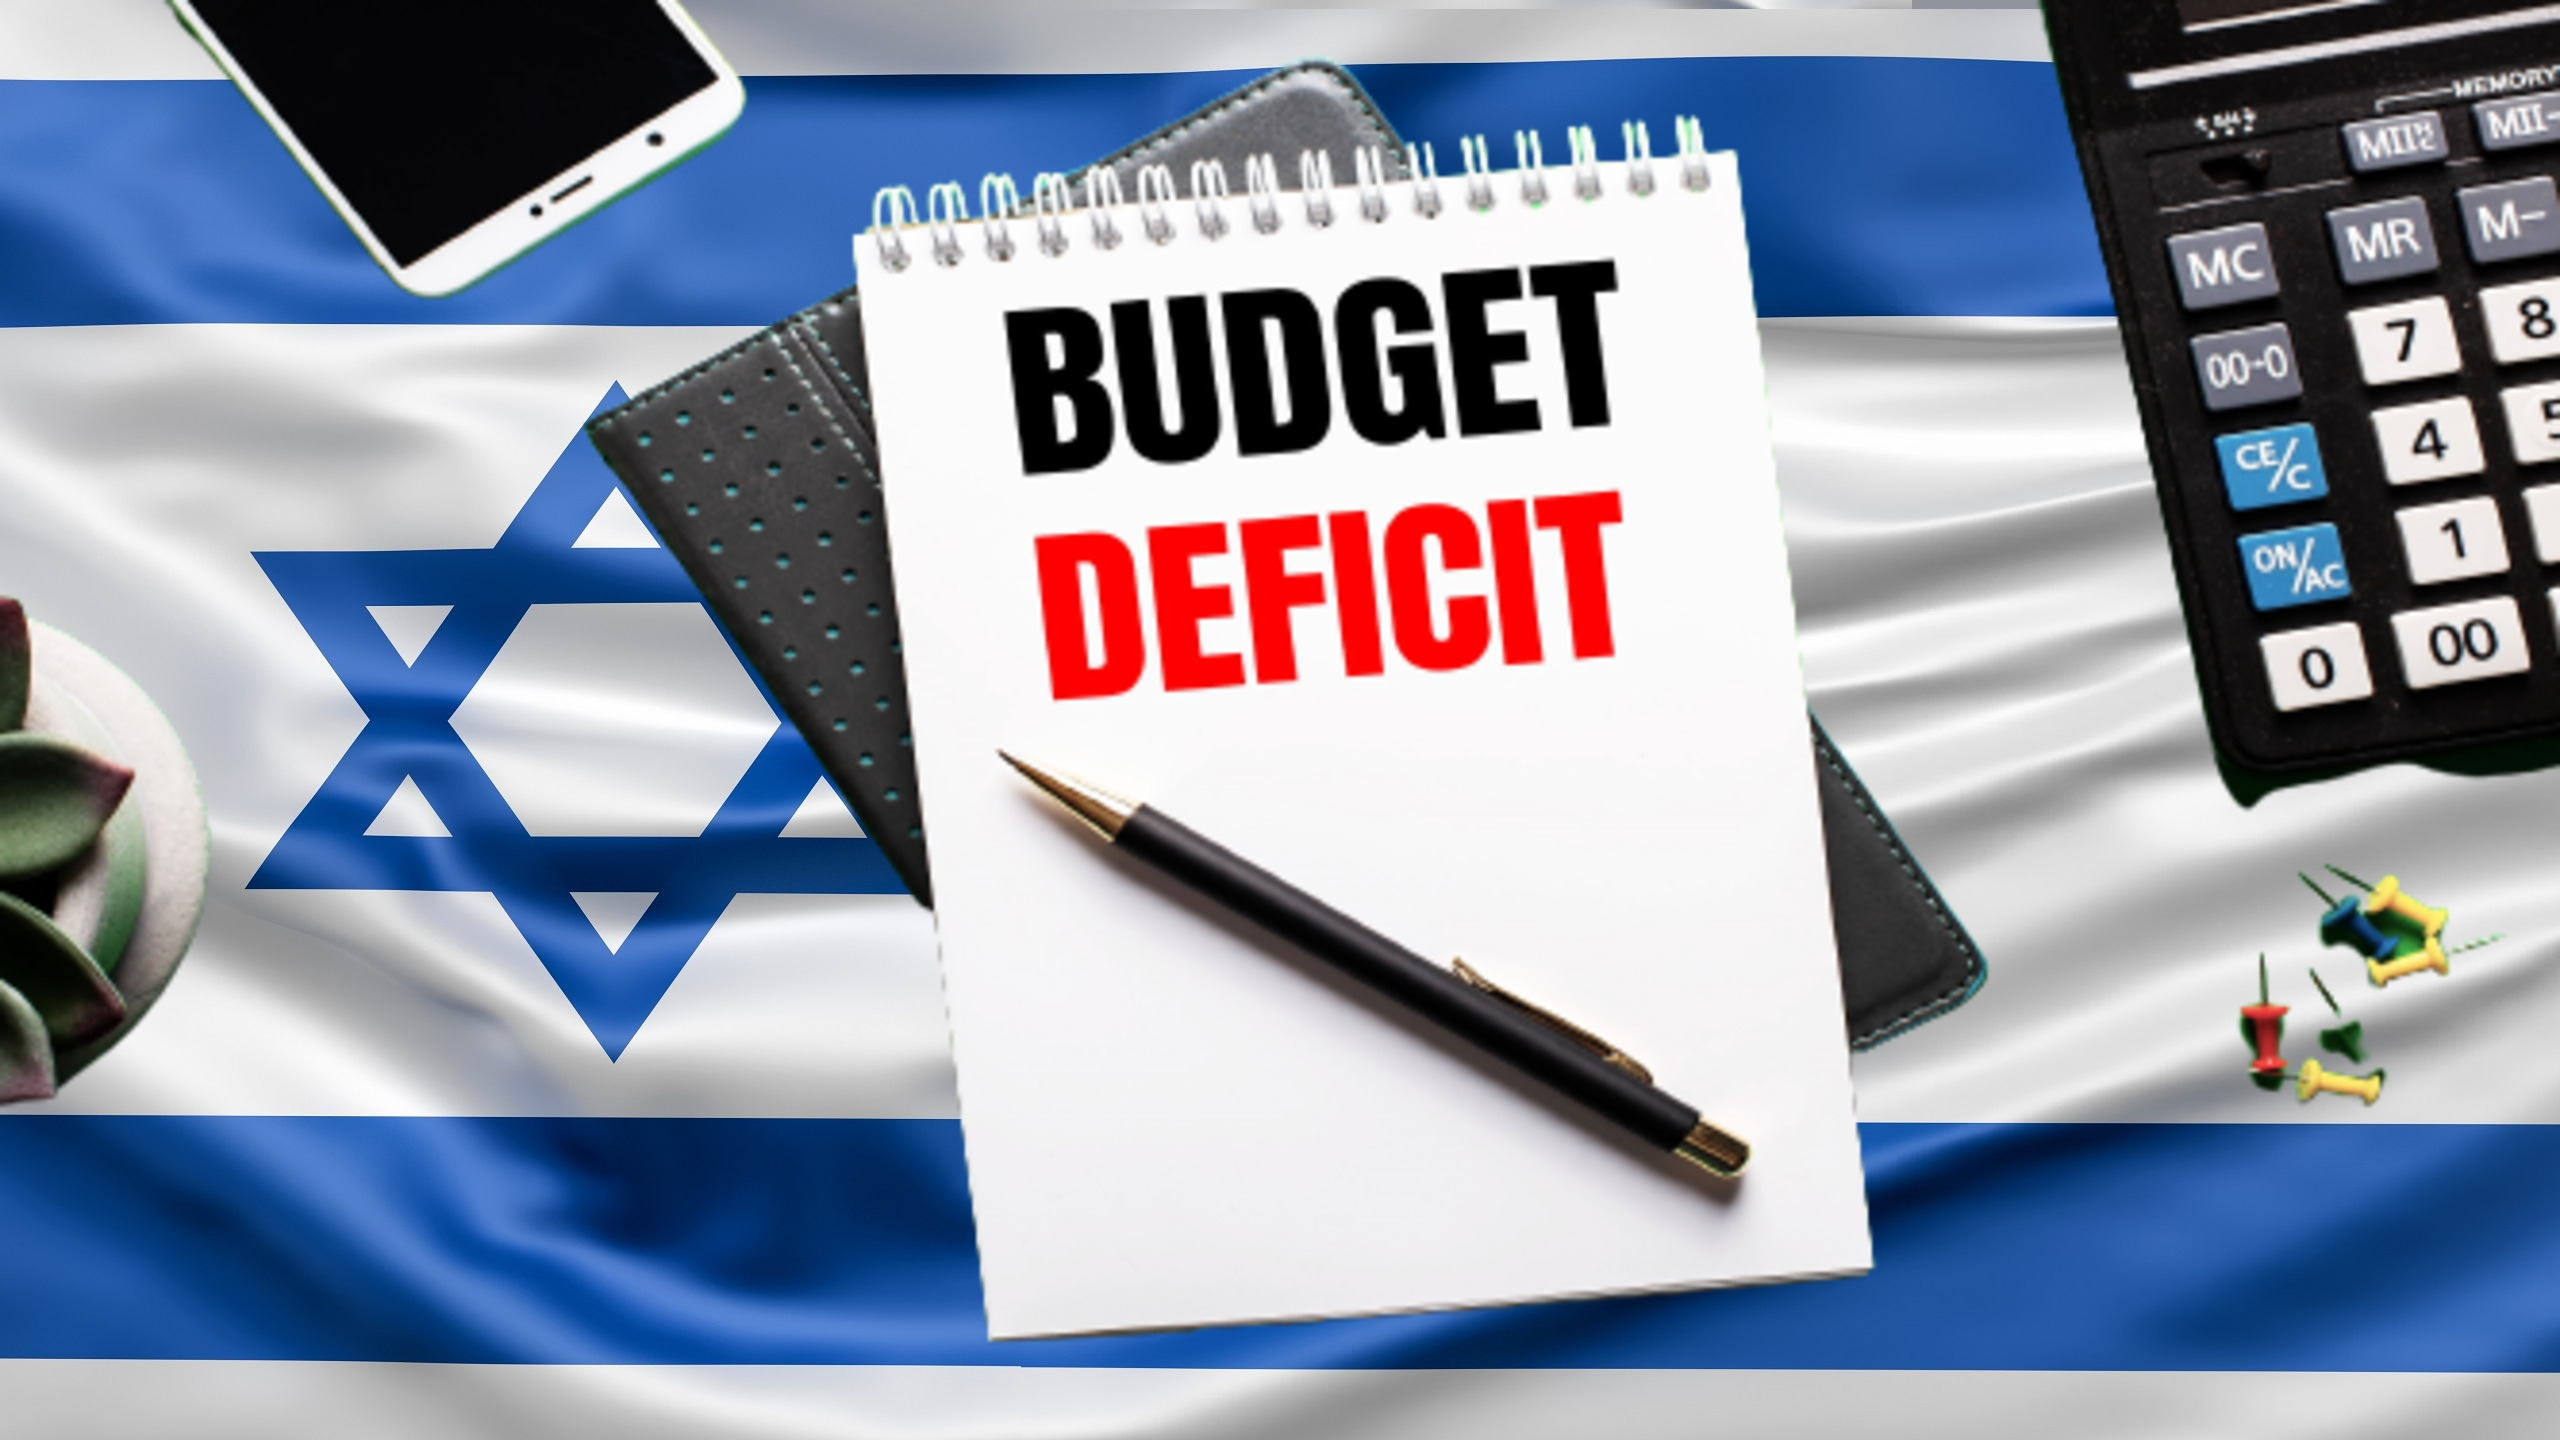 Israel’s Budget Deficit Hits $29.4 Billion, Fueled by Conflict Costs